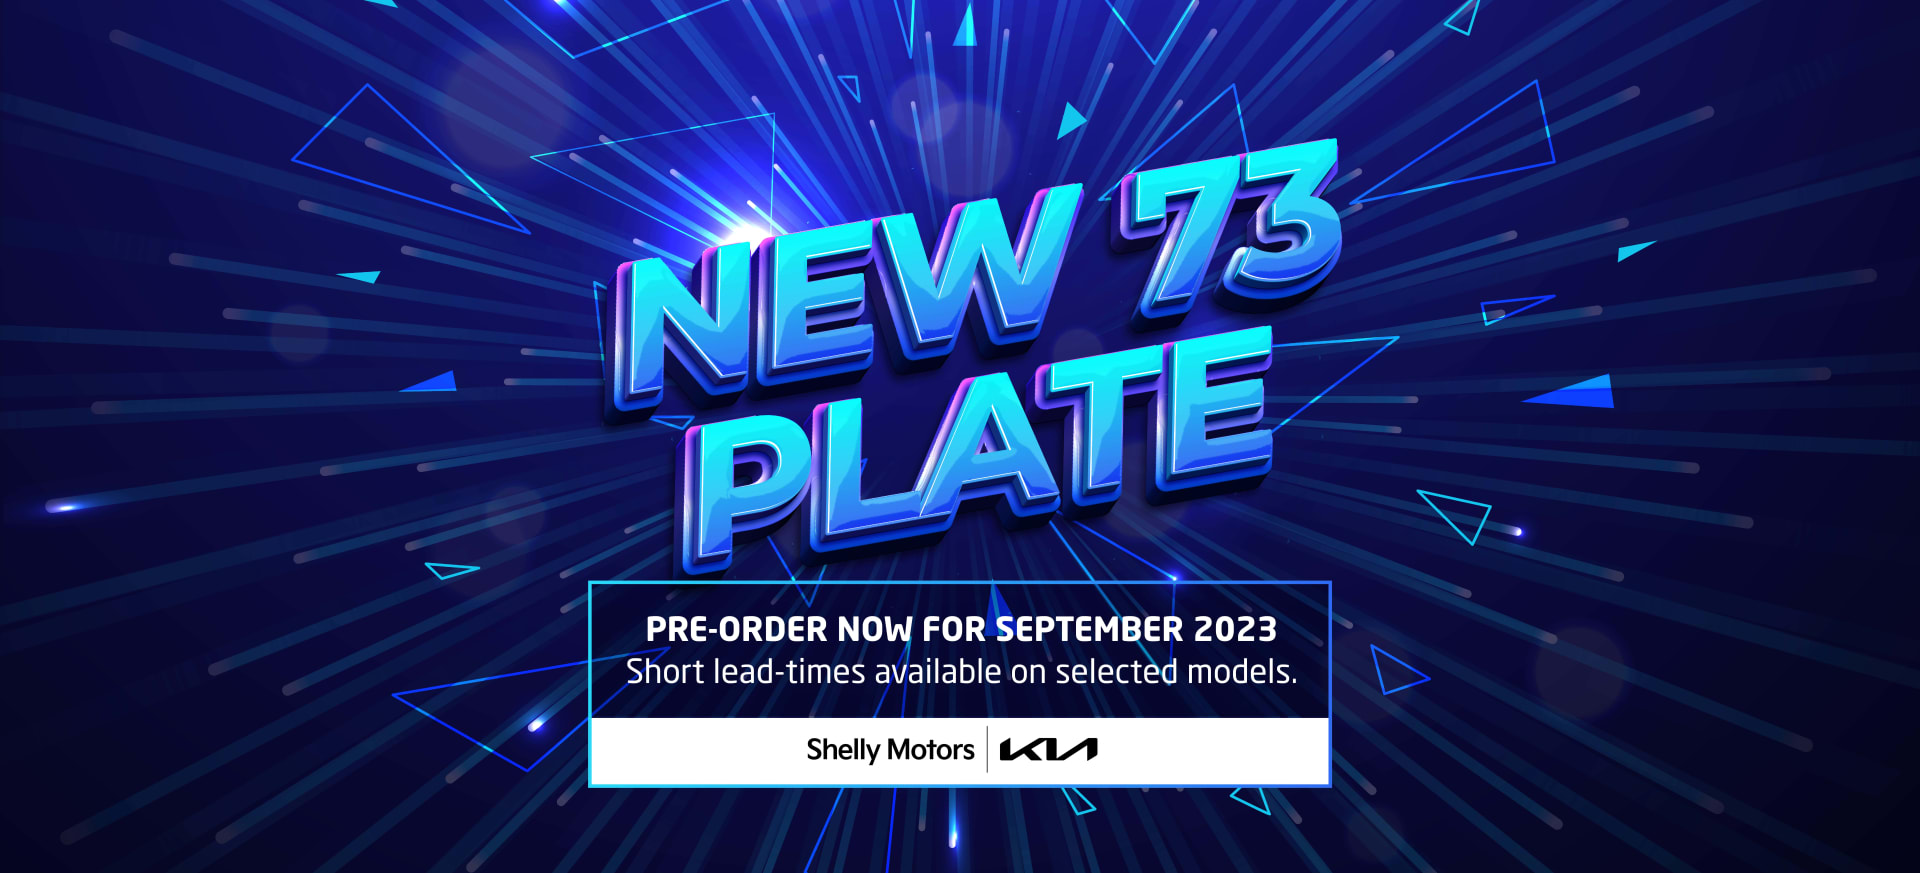 Pre-Order Your New Car With 73 Plate Now